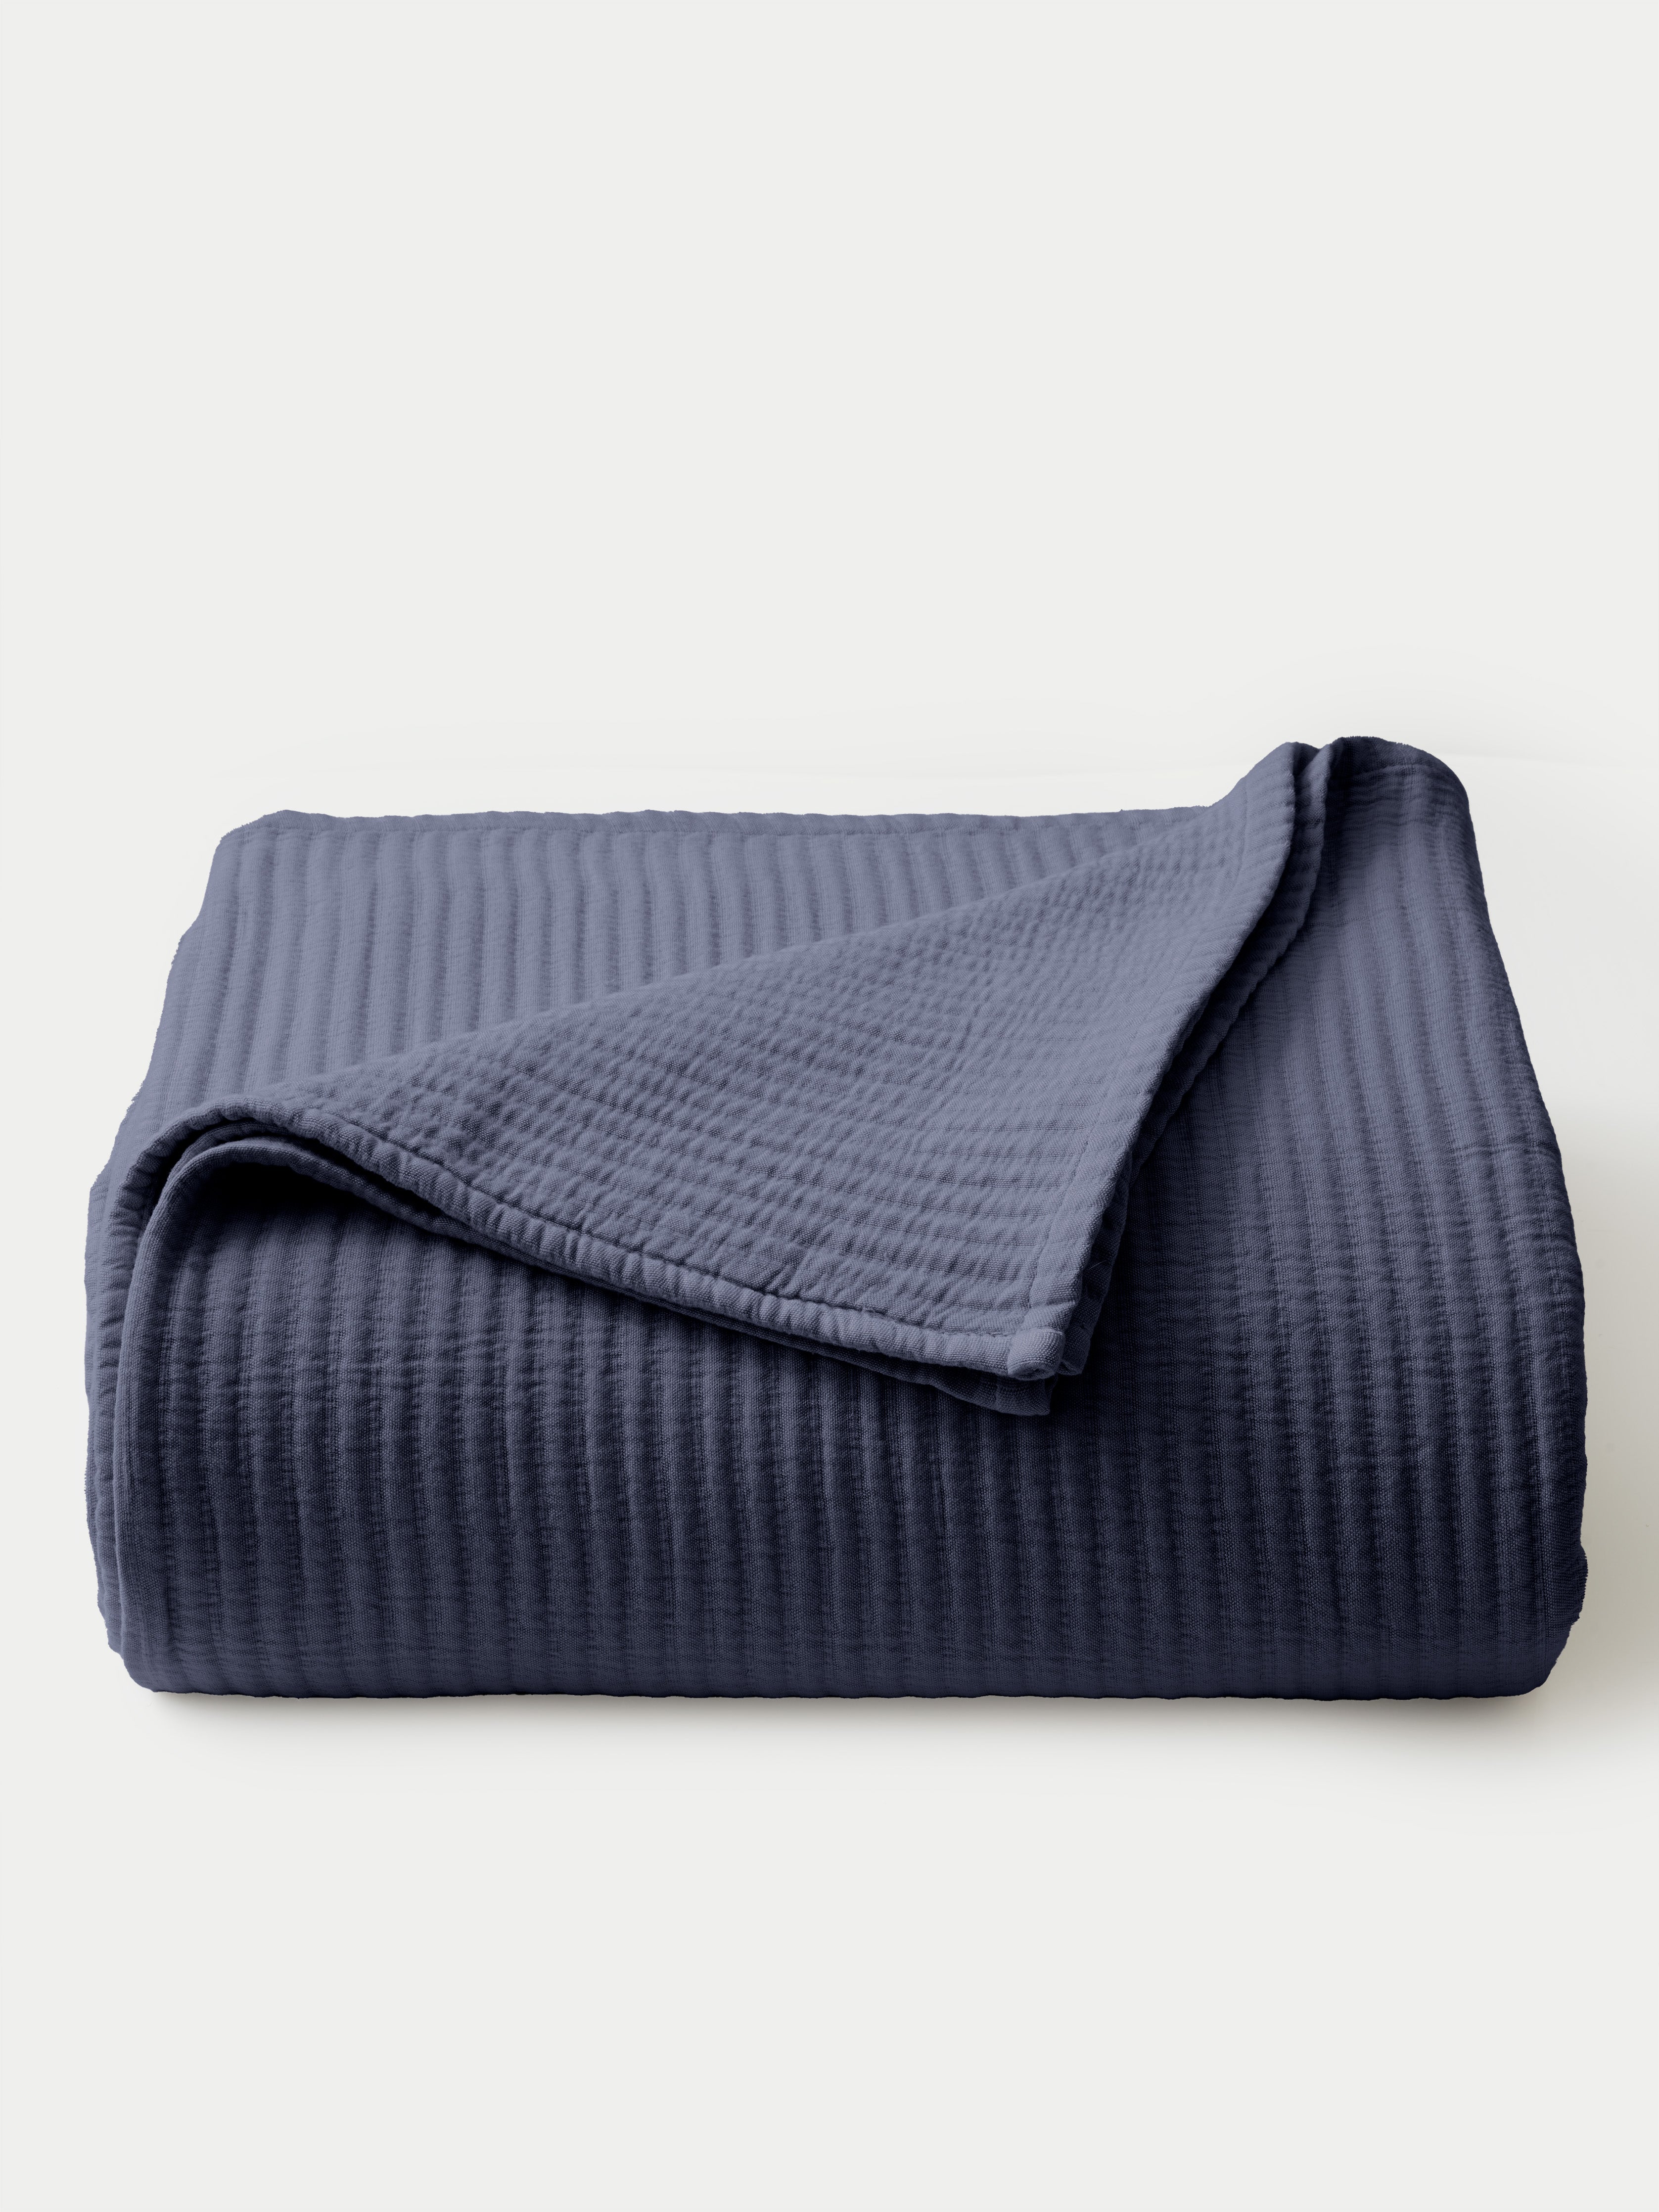 Navy coverlet folded with white background |Color:Navy